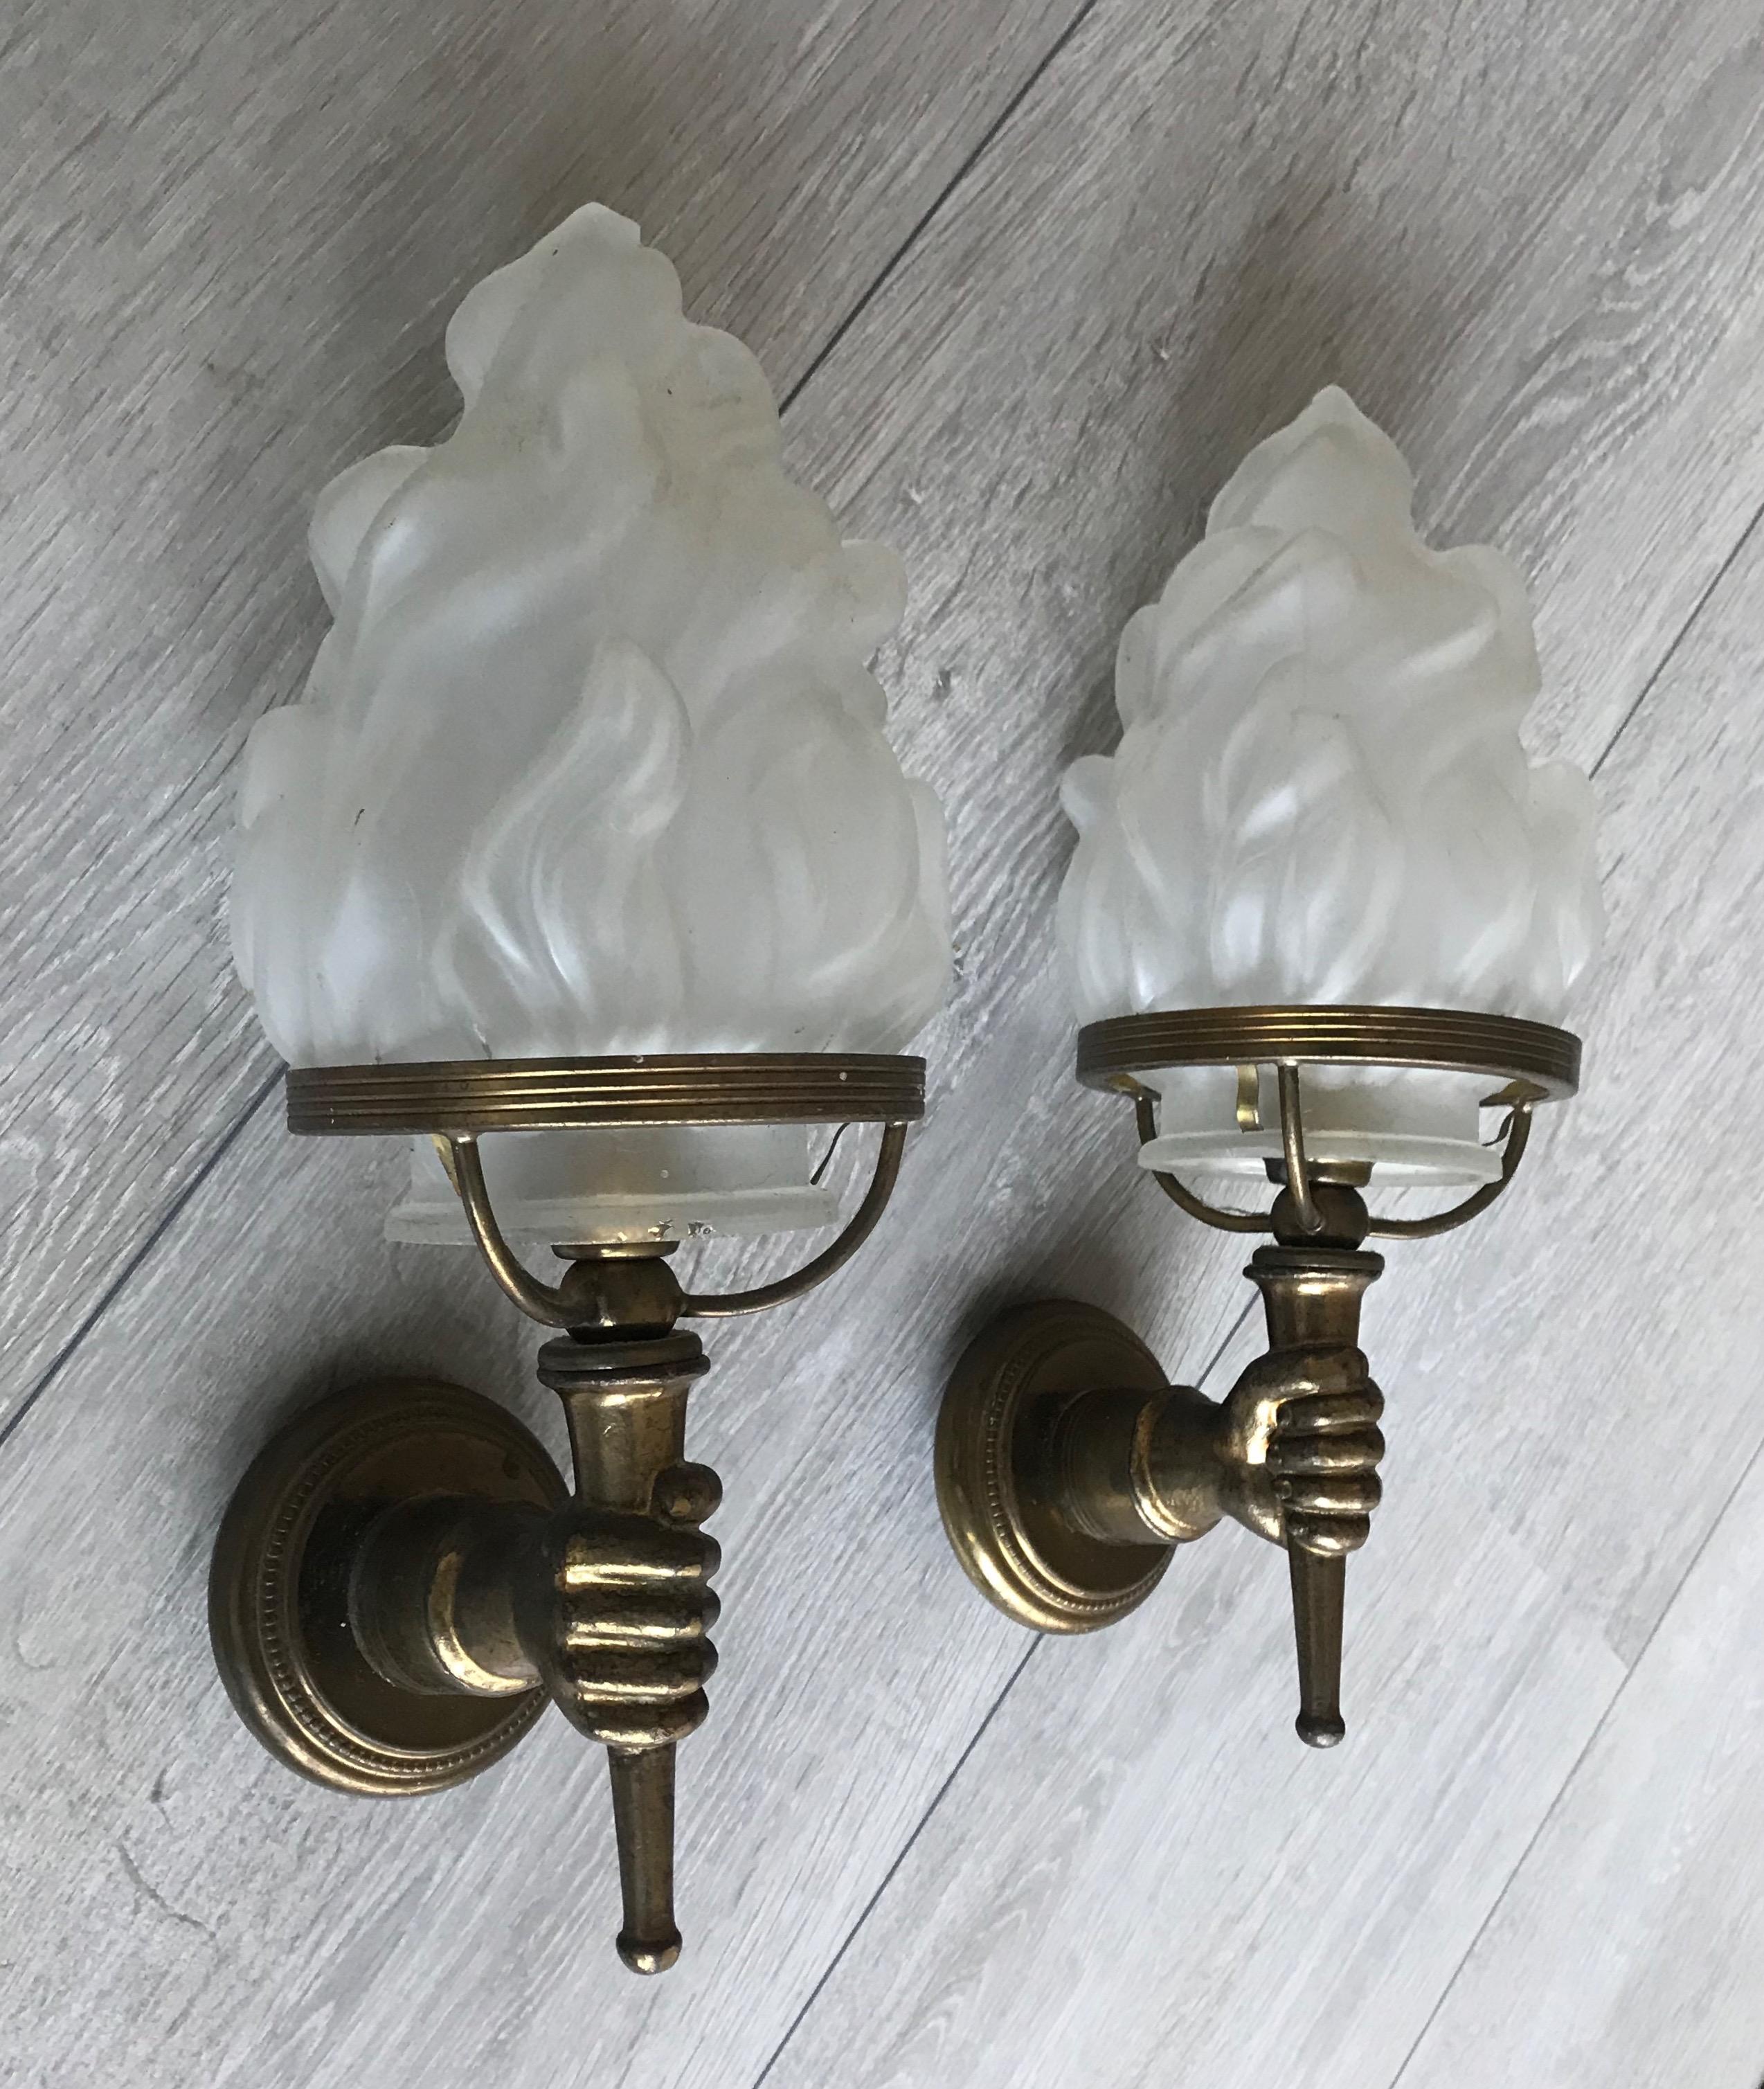 Midcentury hands-holding-torches wall lamps.

If you are looking for a small and decorative pair of wall sconces then look no further. These stylish and sought after, brass wall sconces could make the perfect wall lights over your nightstands, on